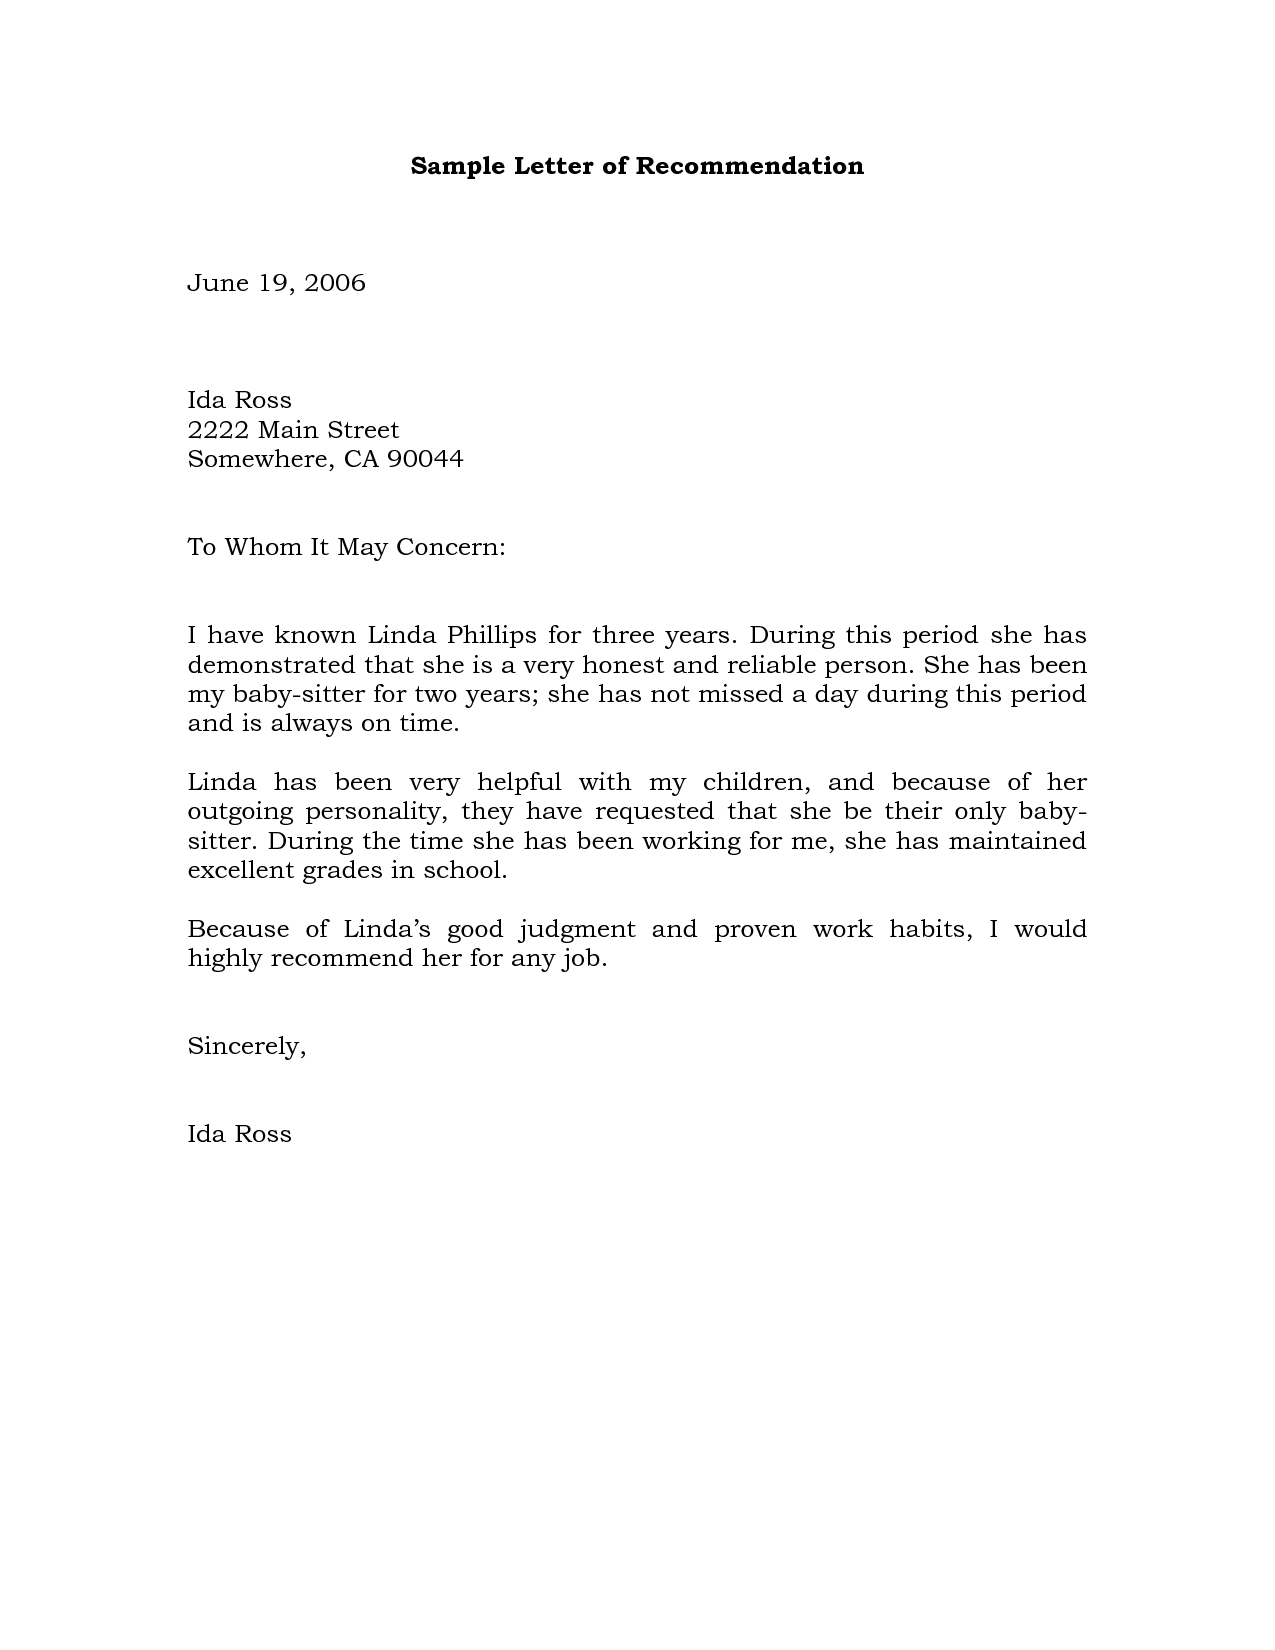 free sample personal reference letter template example-Sample Re mendation Letter Example 11-f